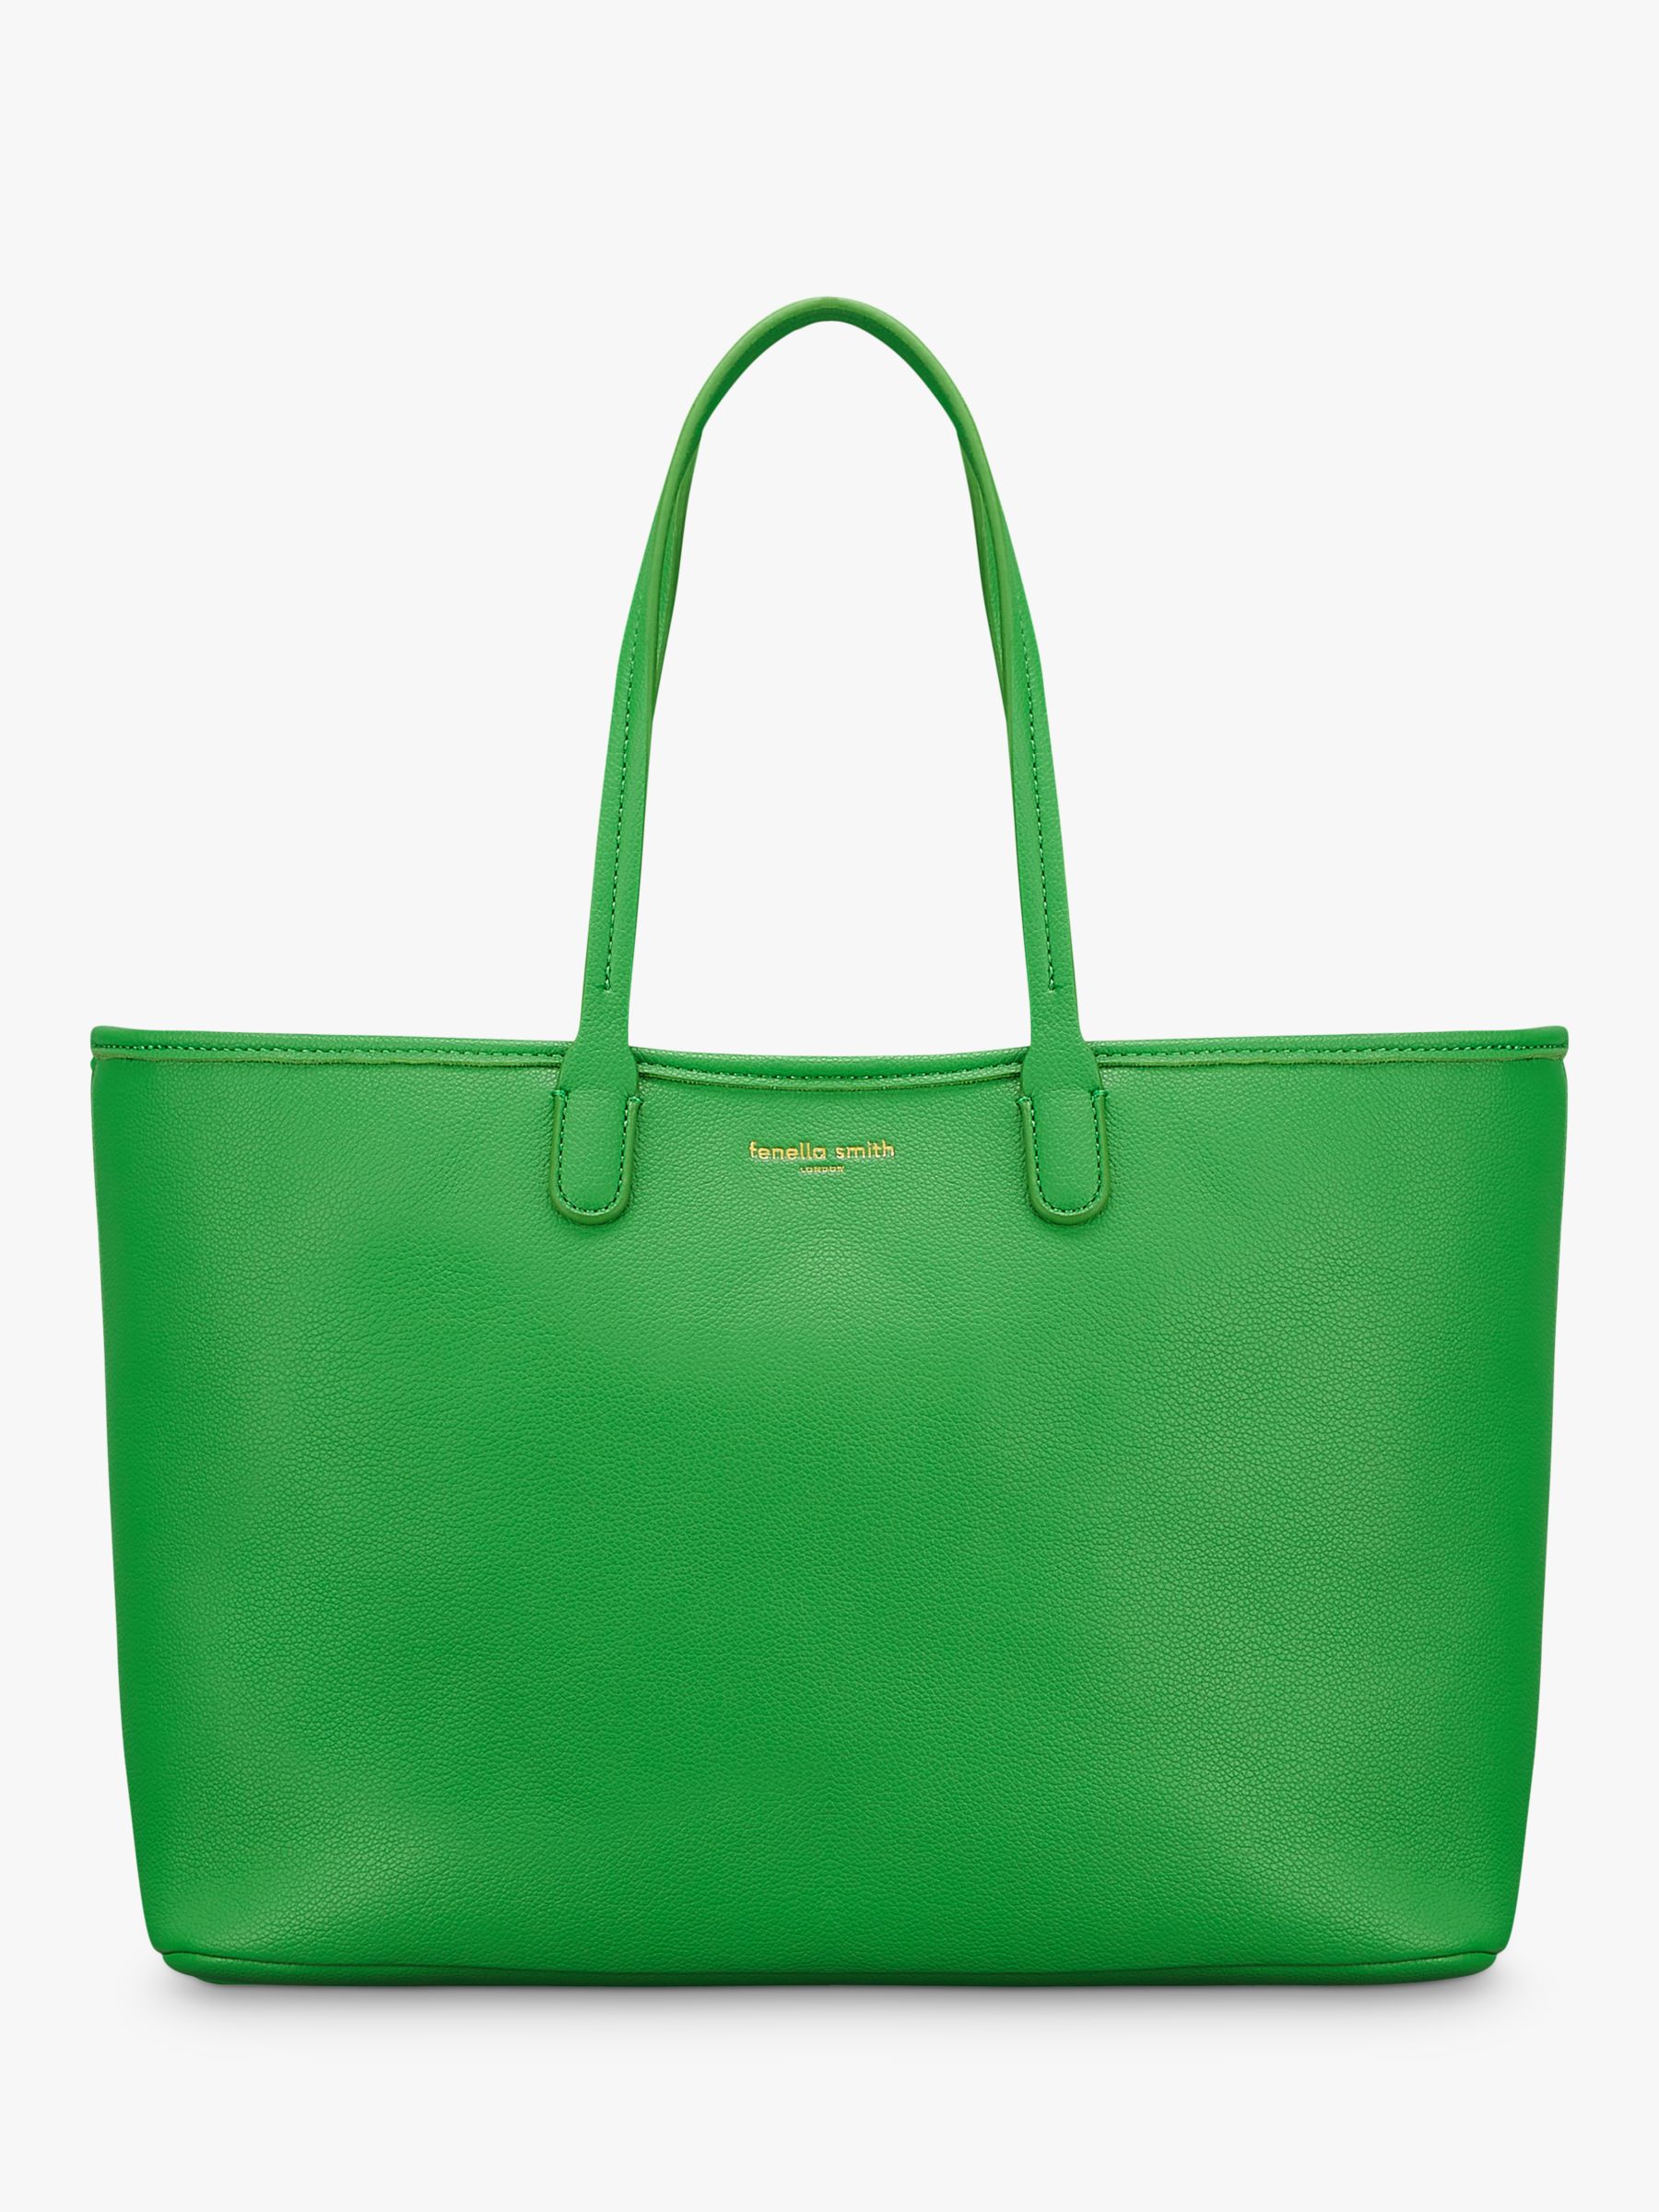 Fenella Smith Izzie Tote Bag, Green at John Lewis & Partners